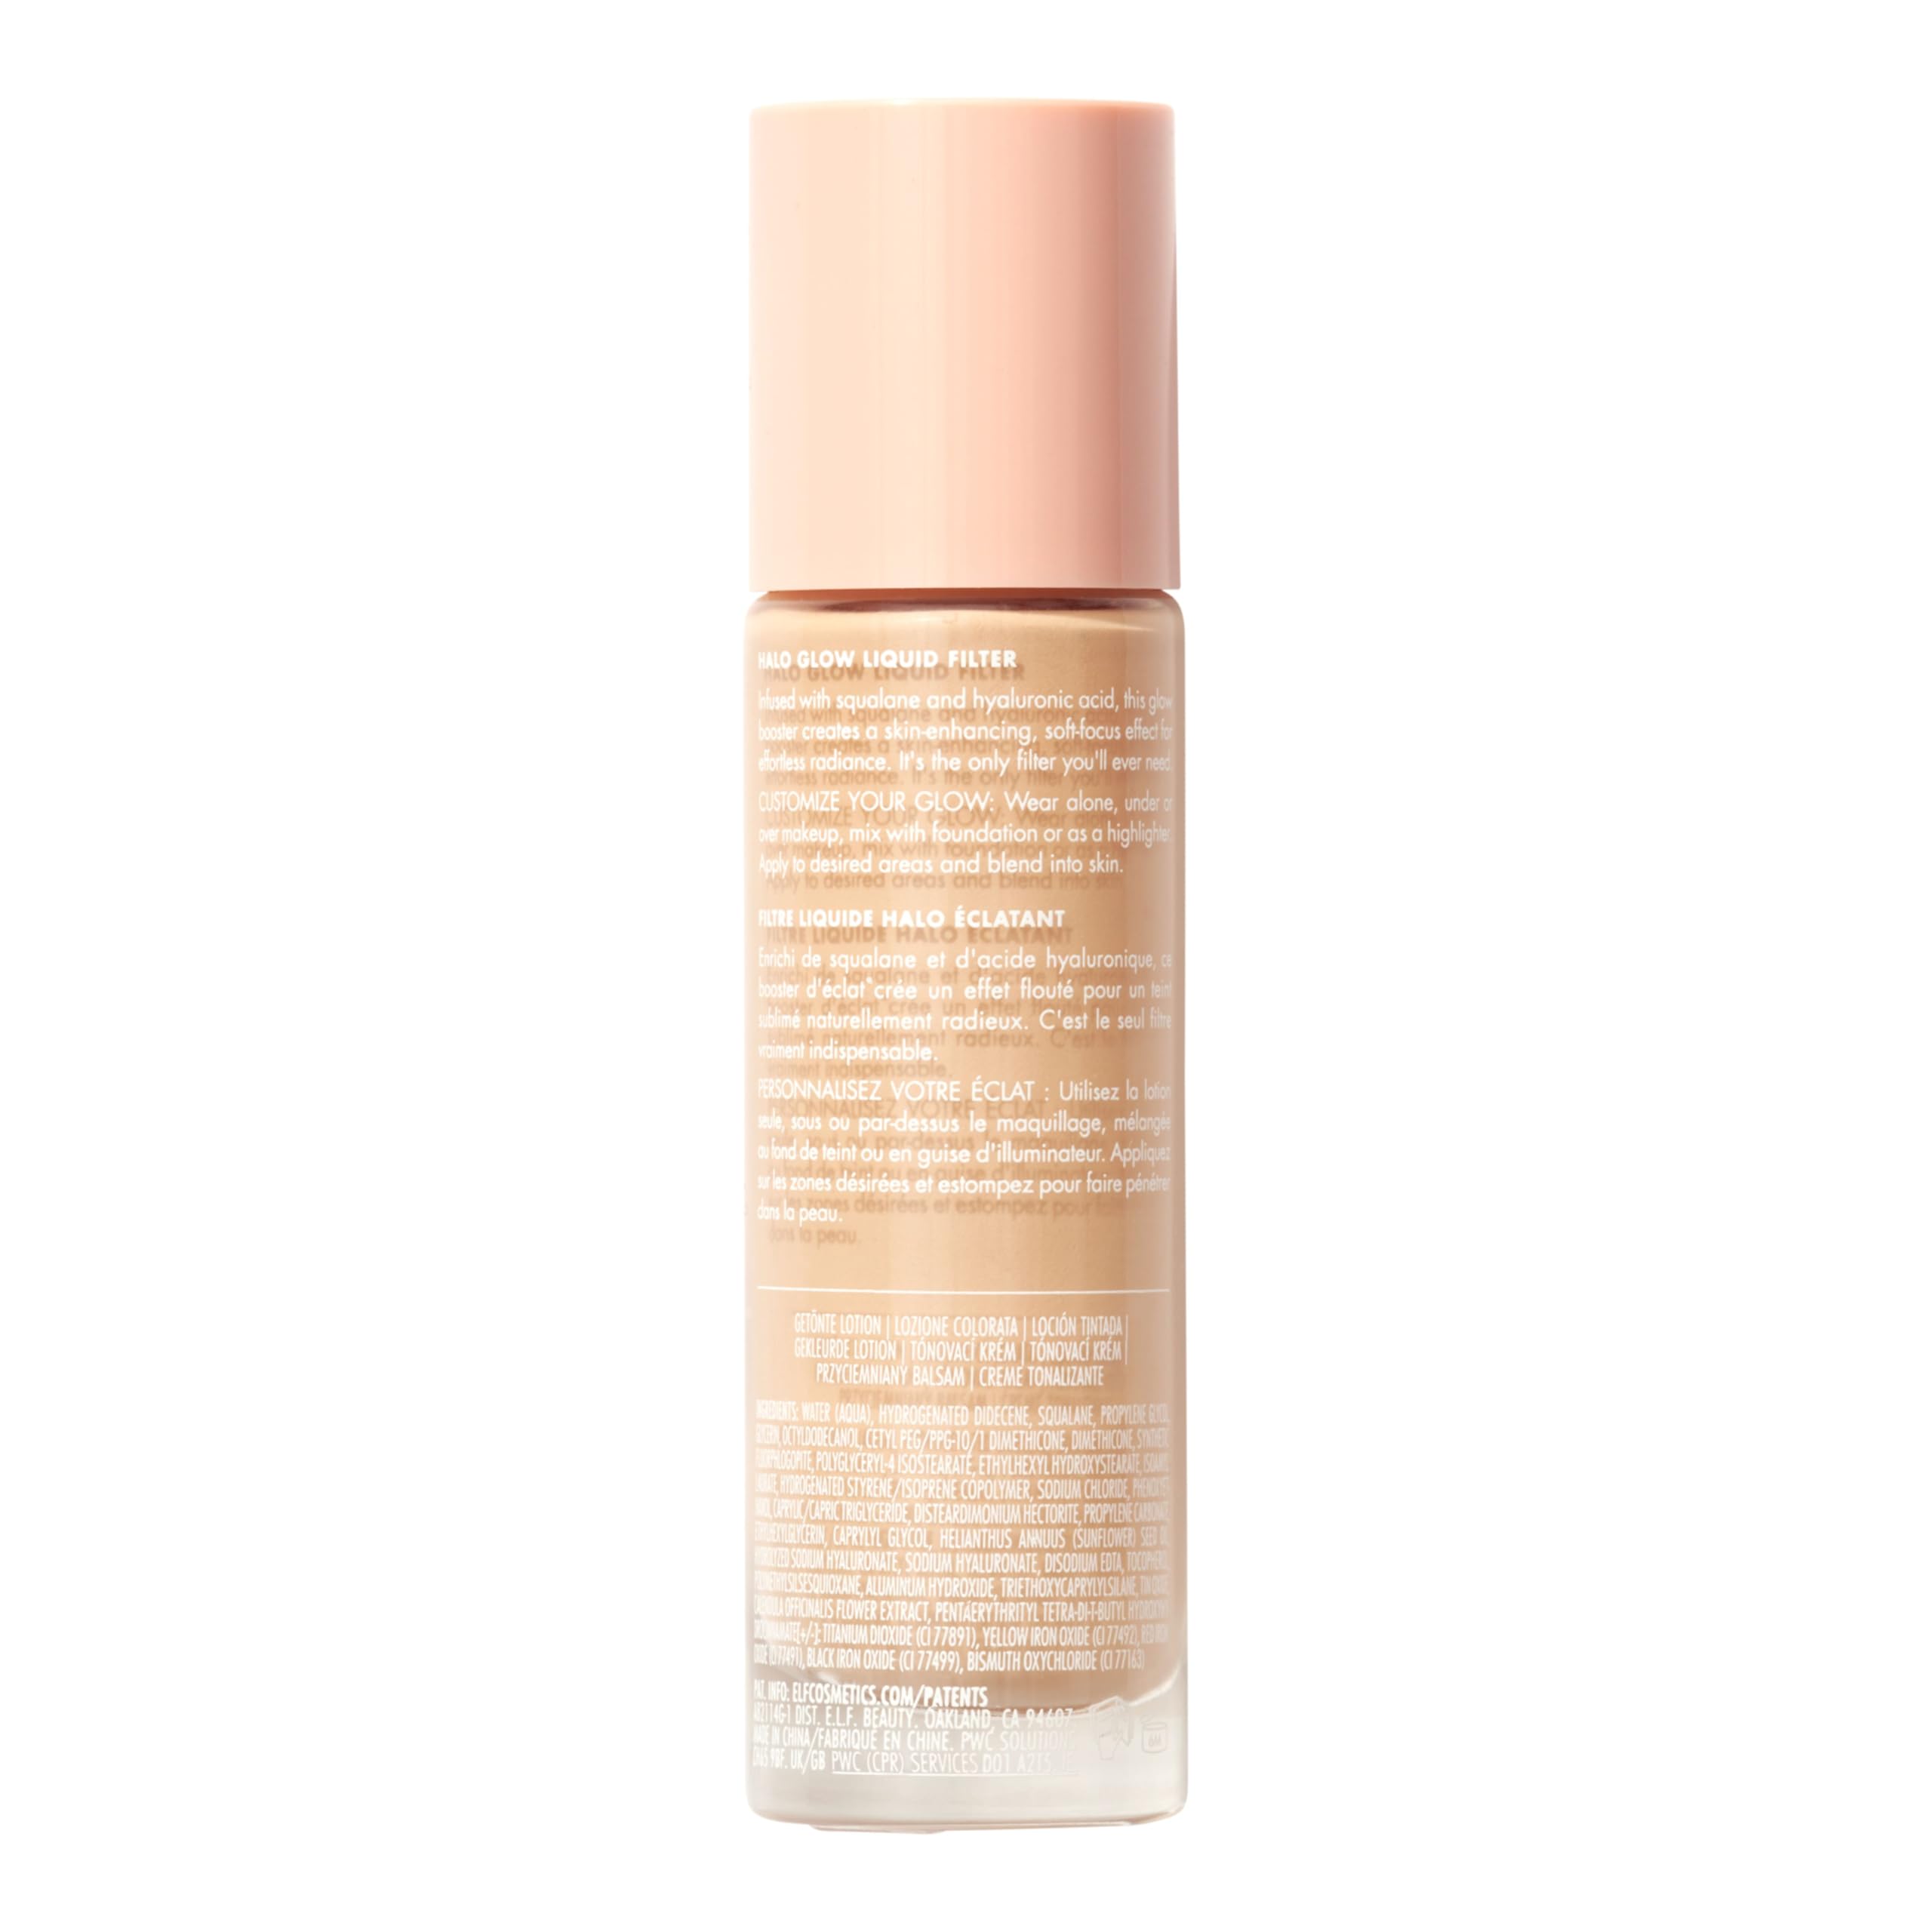 e.l.f. Halo Glow Liquid Filter, Complexion Booster For A Glowing, Soft-Focus Look, Infused With Hyaluronic Acid, Vegan & Cruelty-Free, 0 Fair